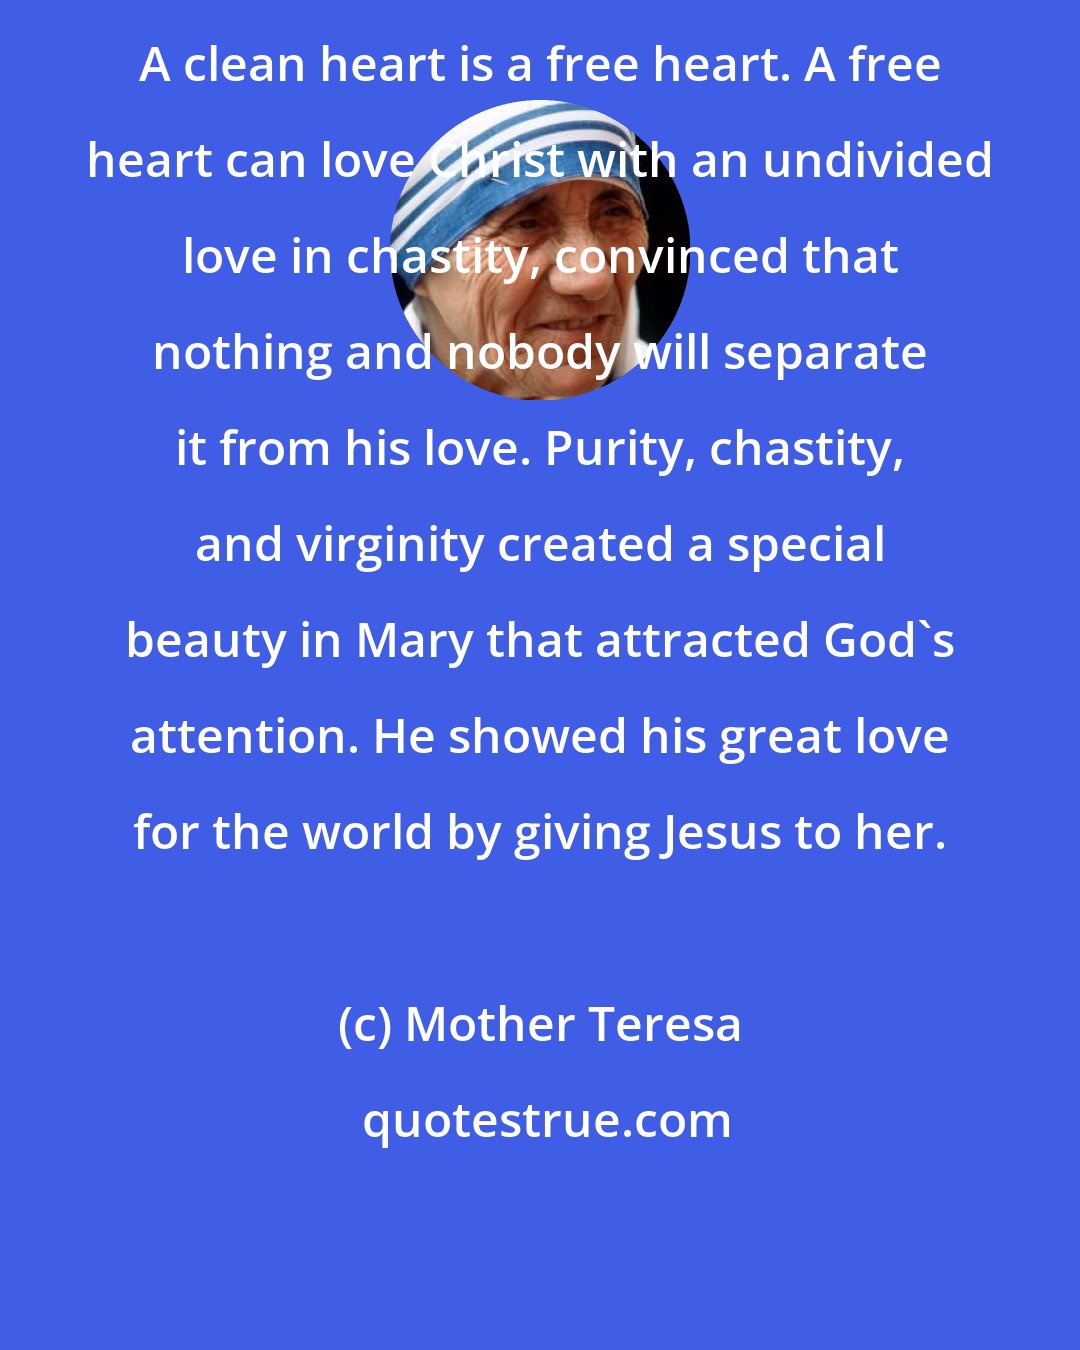 Mother Teresa: A clean heart is a free heart. A free heart can love Christ with an undivided love in chastity, convinced that nothing and nobody will separate it from his love. Purity, chastity, and virginity created a special beauty in Mary that attracted God's attention. He showed his great love for the world by giving Jesus to her.